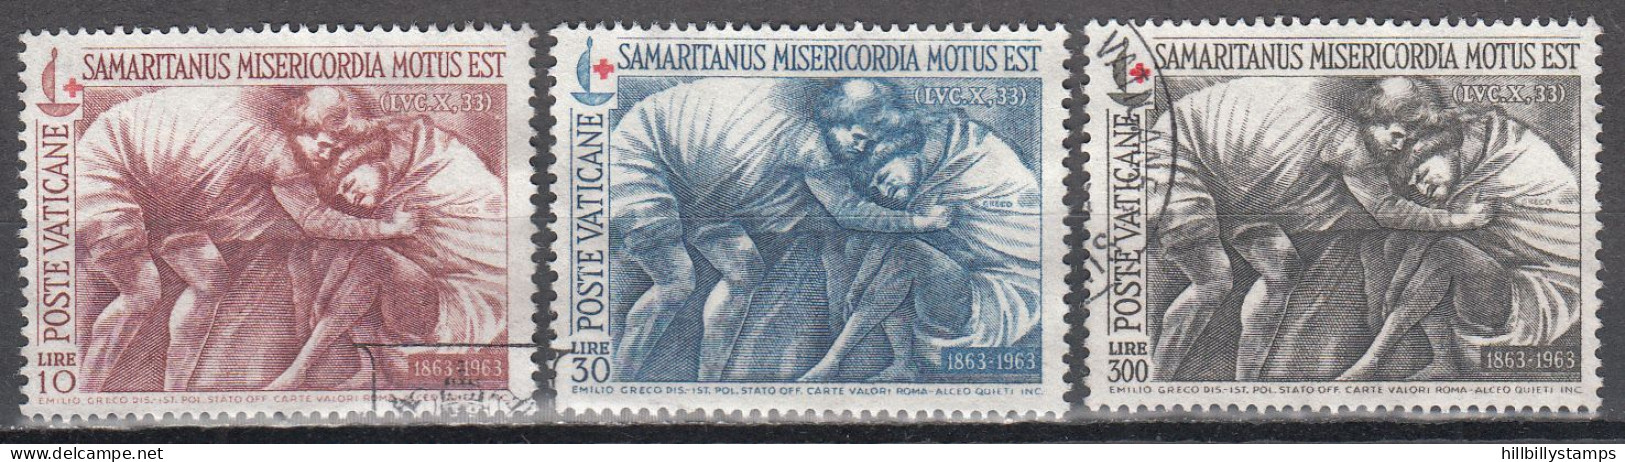 VATICAN   SCOTT NO 392-94  USED   YEAR  1964 - Used Stamps